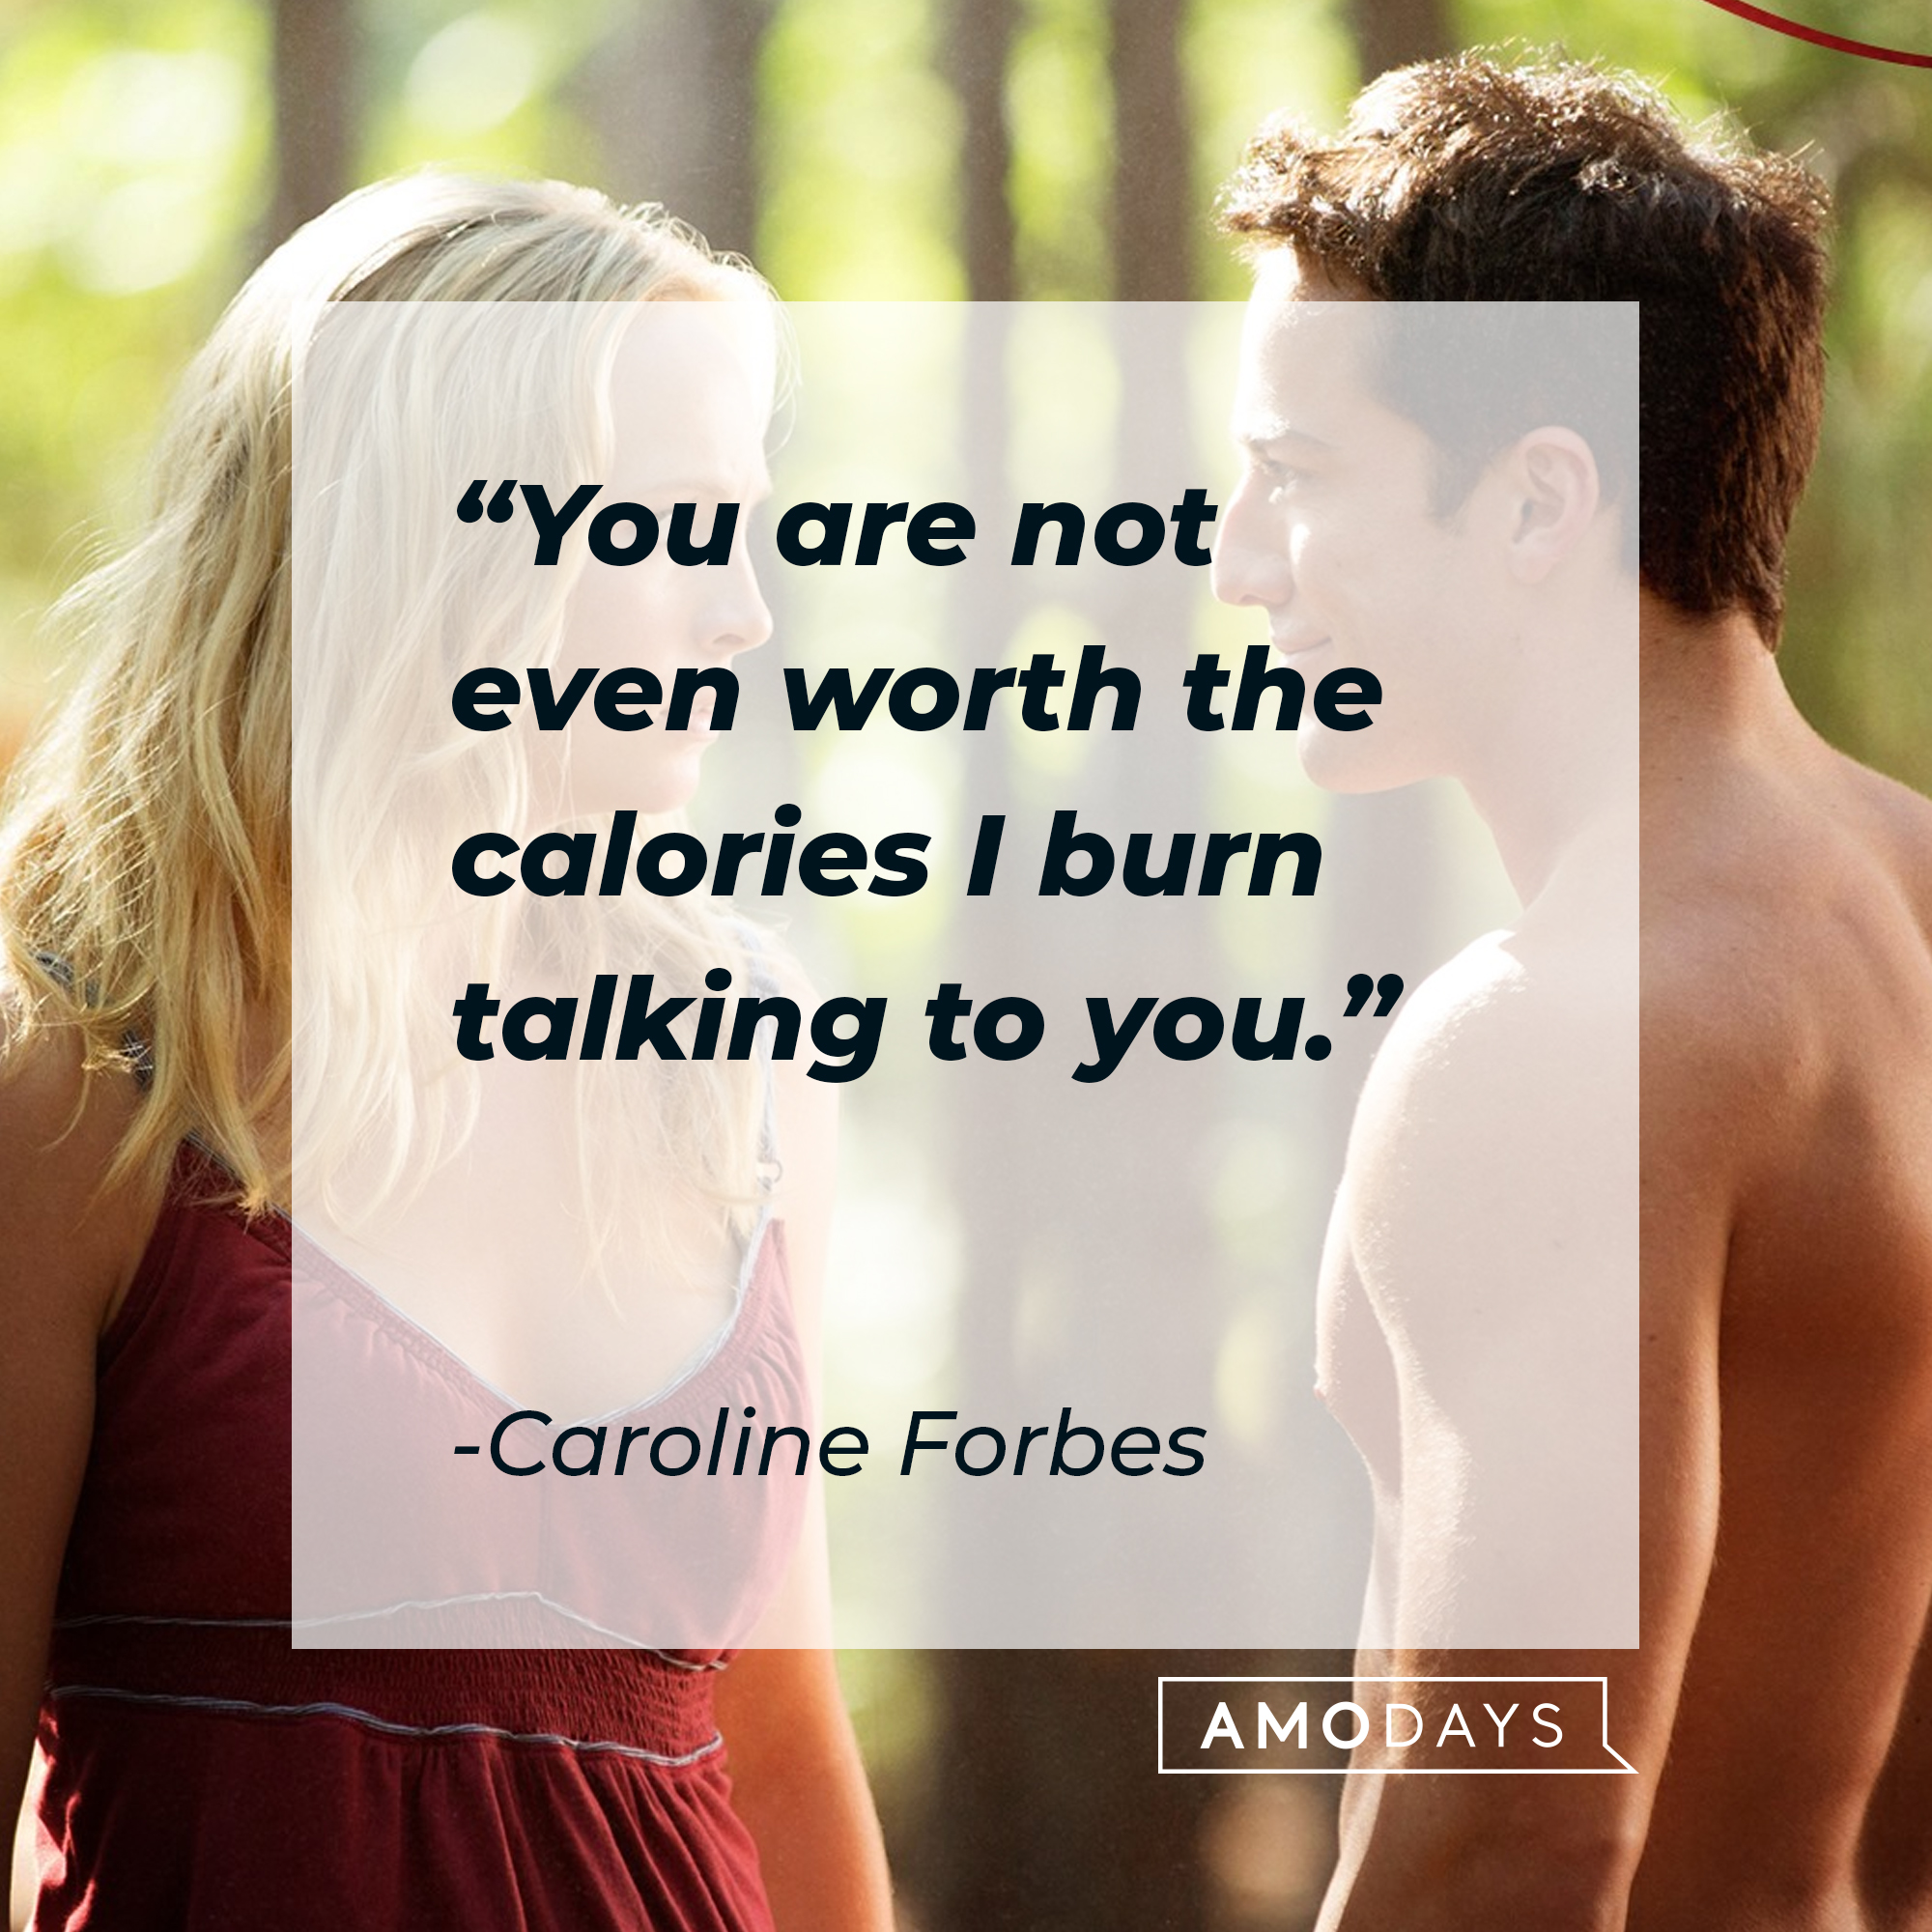 Caroline Forbes' quote: "You are not even worth the calories I burn talking to you." | Source: Facebook.com/thevampirediaries